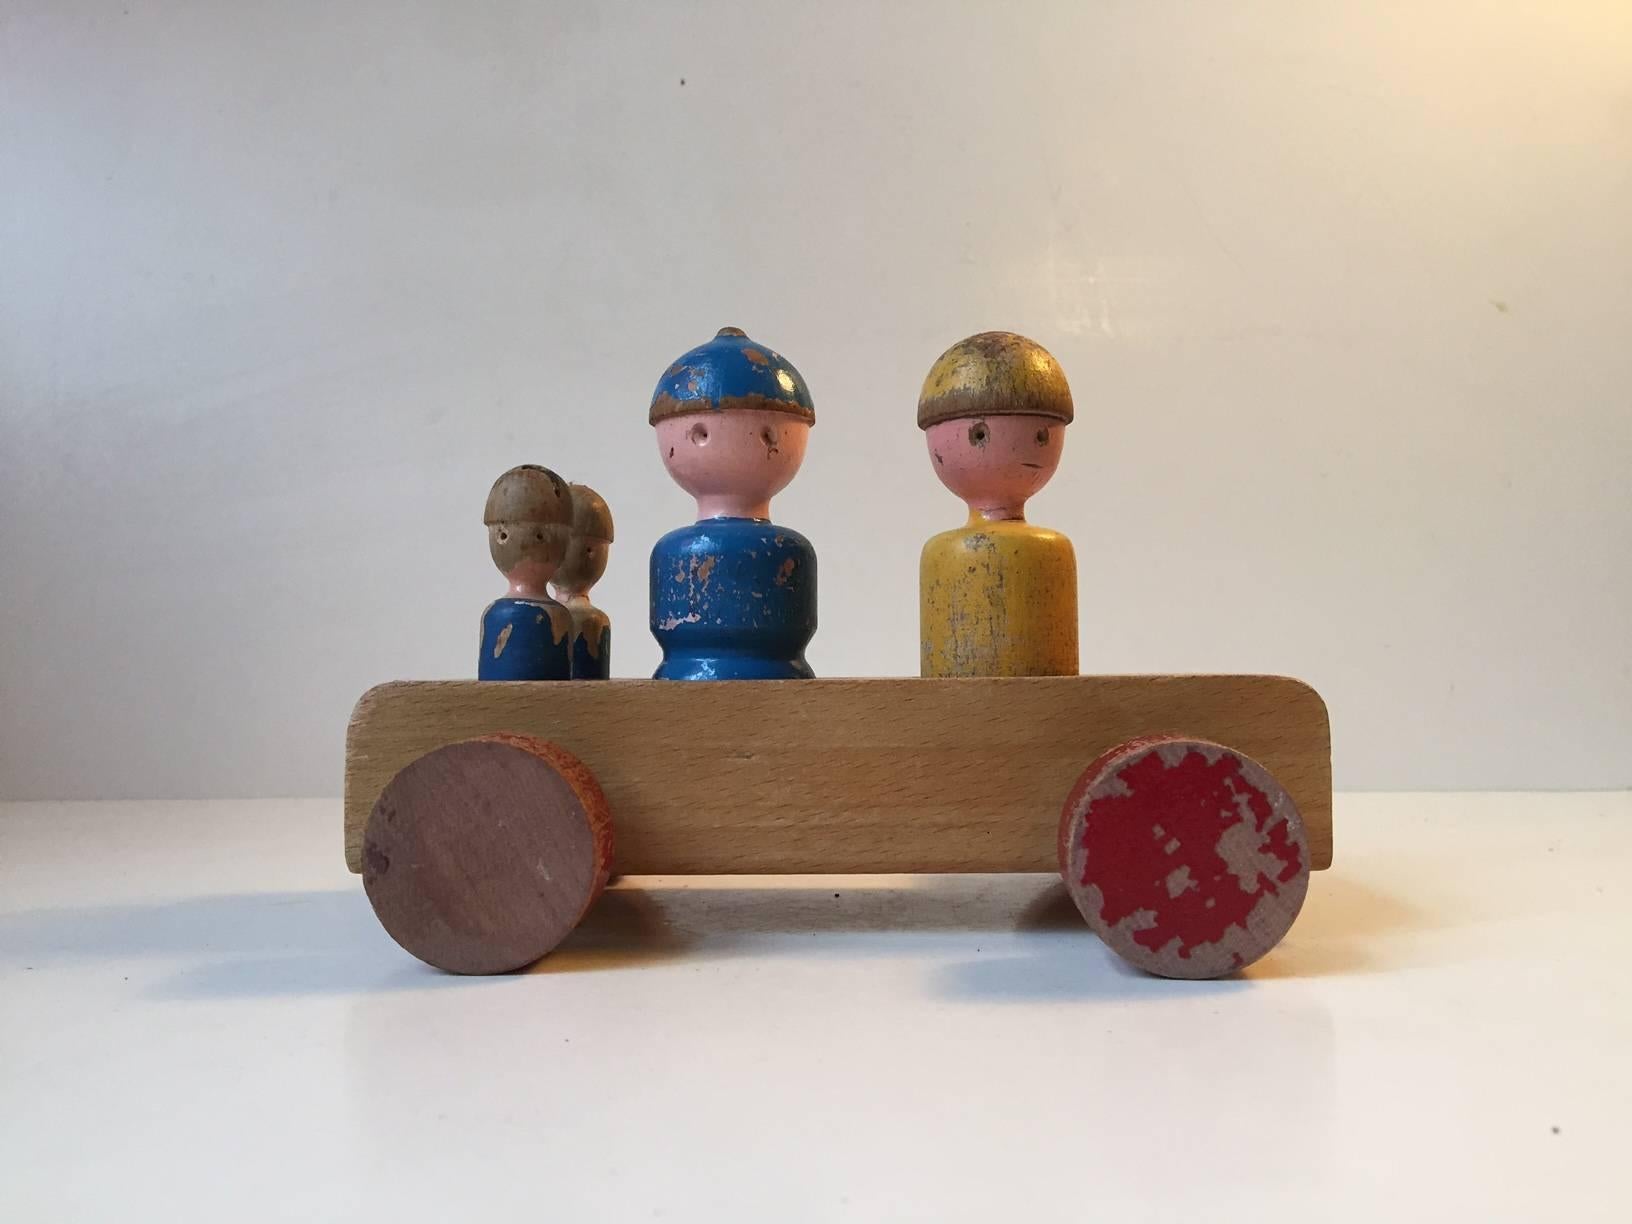 This Wagon designed by Kay Bojesen in the 1950s features four characters in a wagon: mother, father and their two sons. This items has been loved and played with for many years and this shows in the most charming and 'chappy' way.